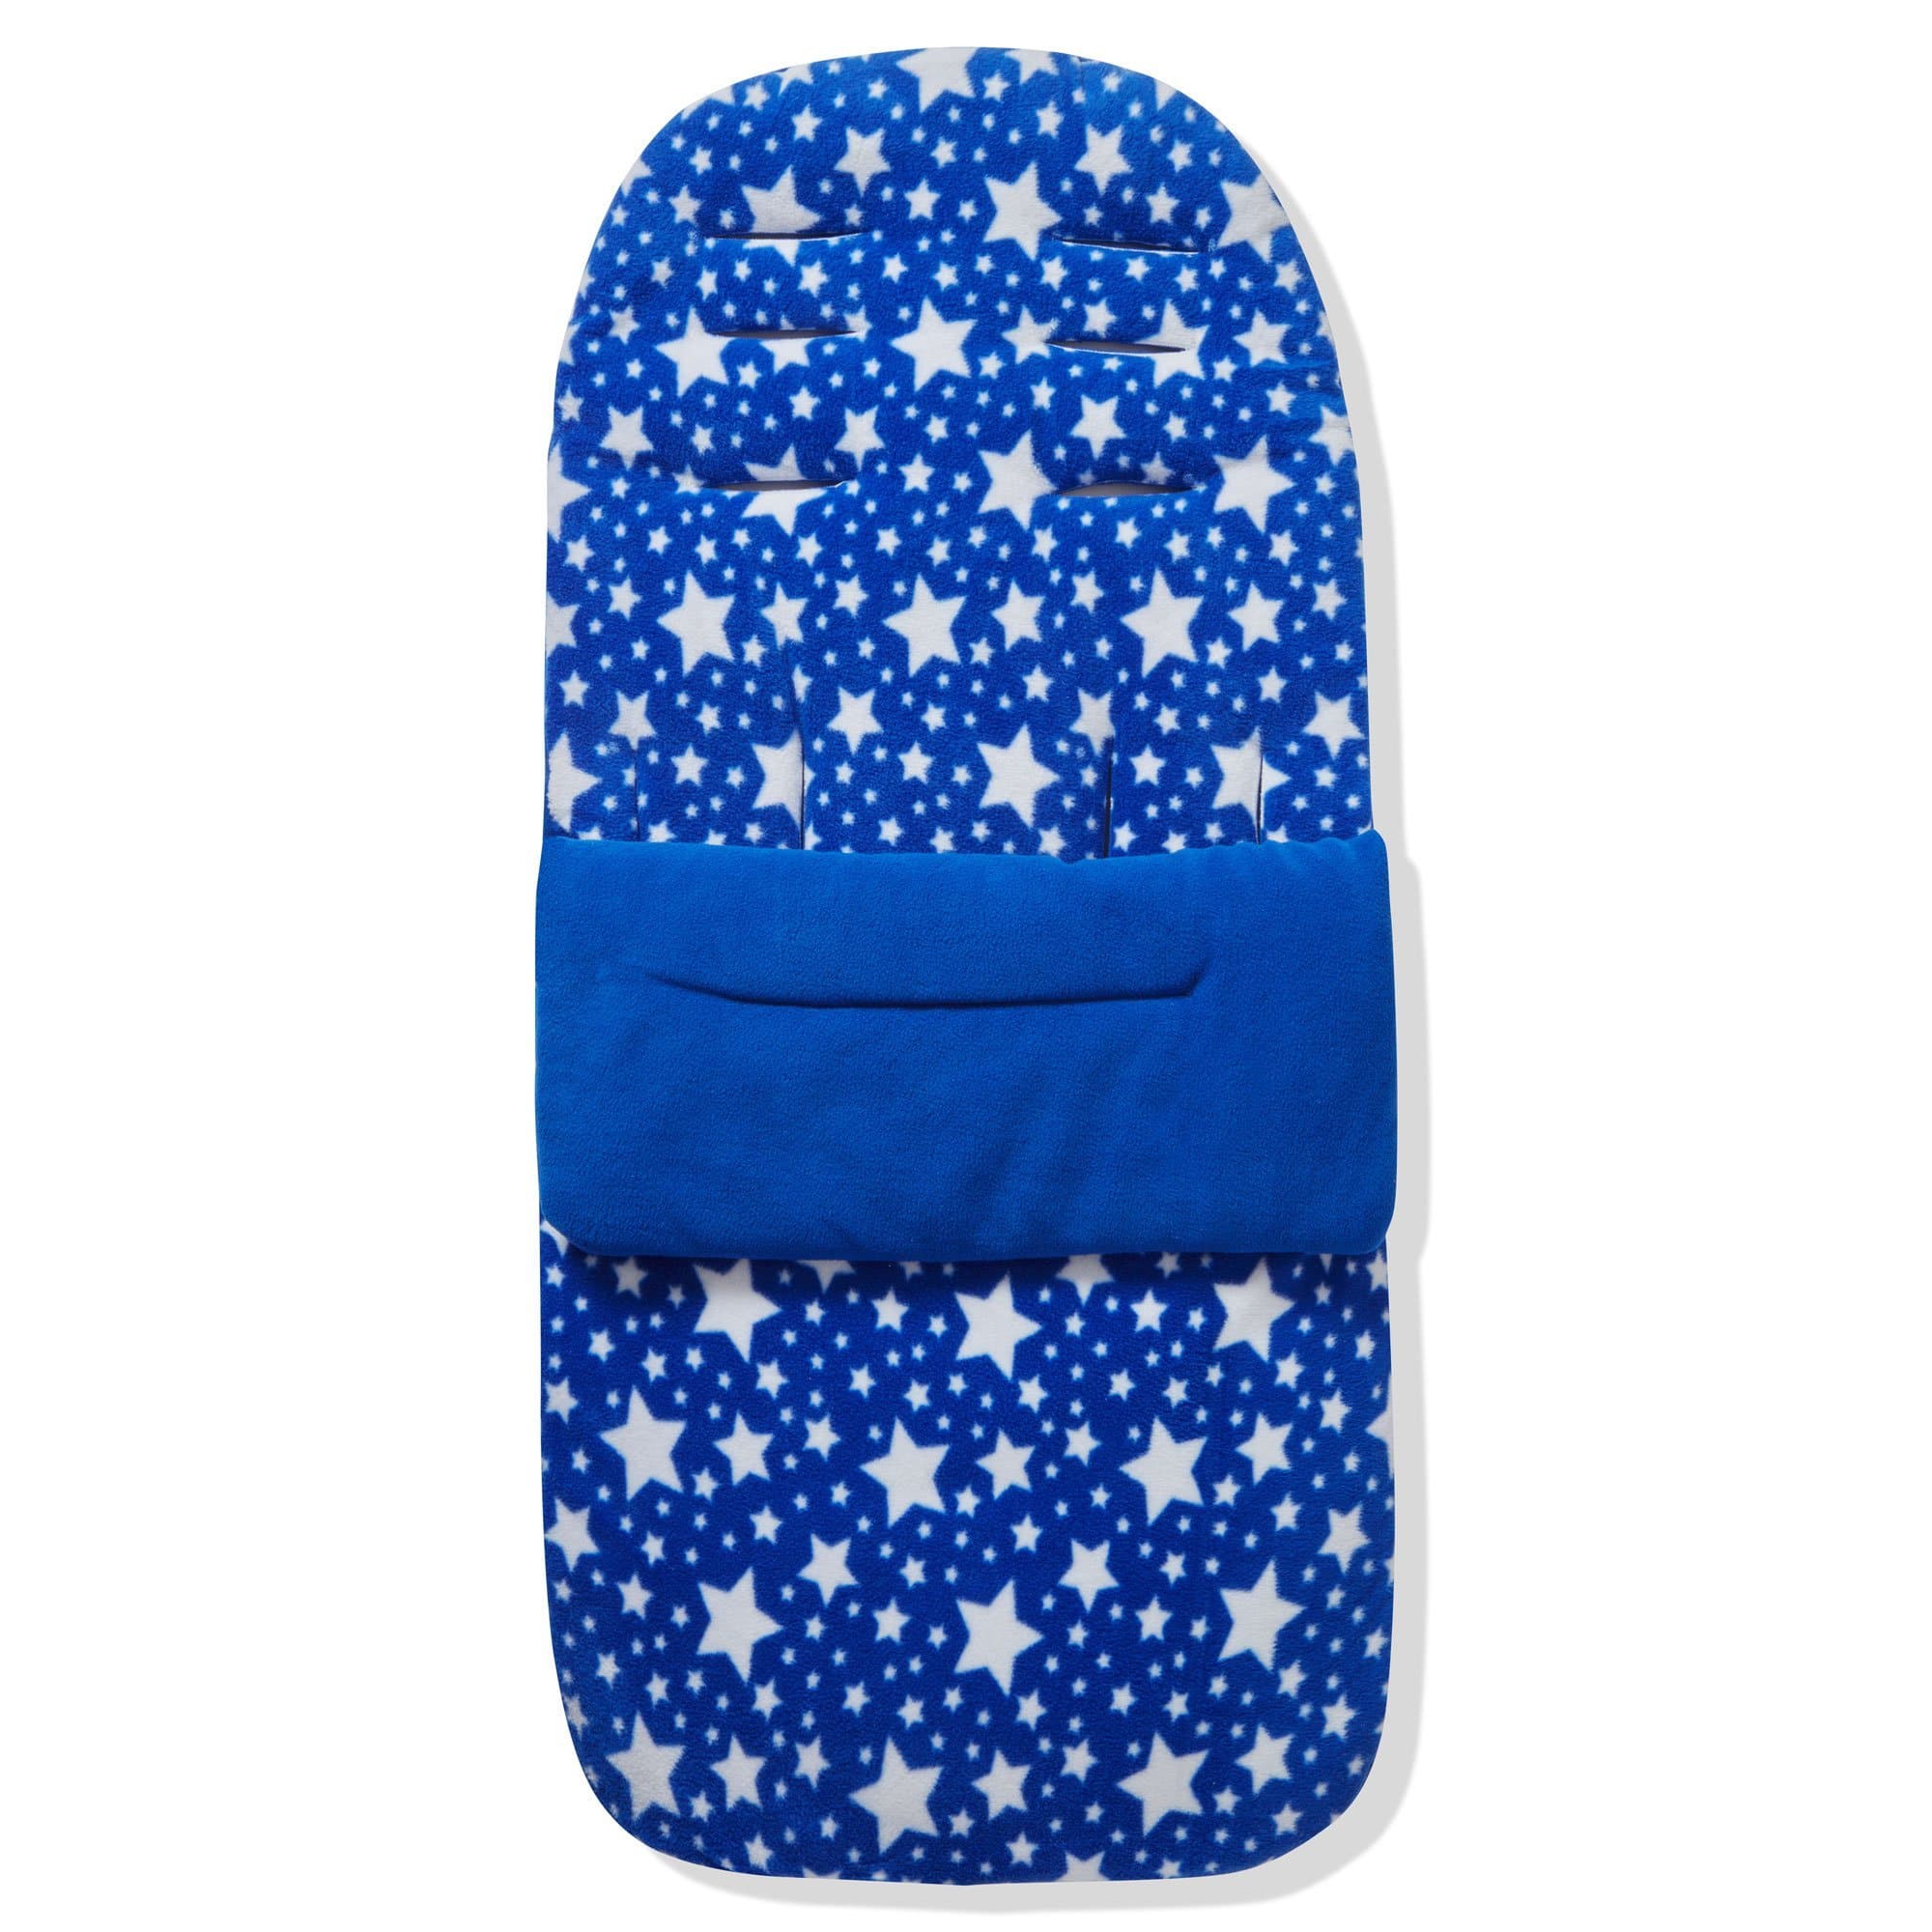 Fleece Footmuff / Cosy Toes Compatible with Roma - Blue Star / Fits All Models | For Your Little One